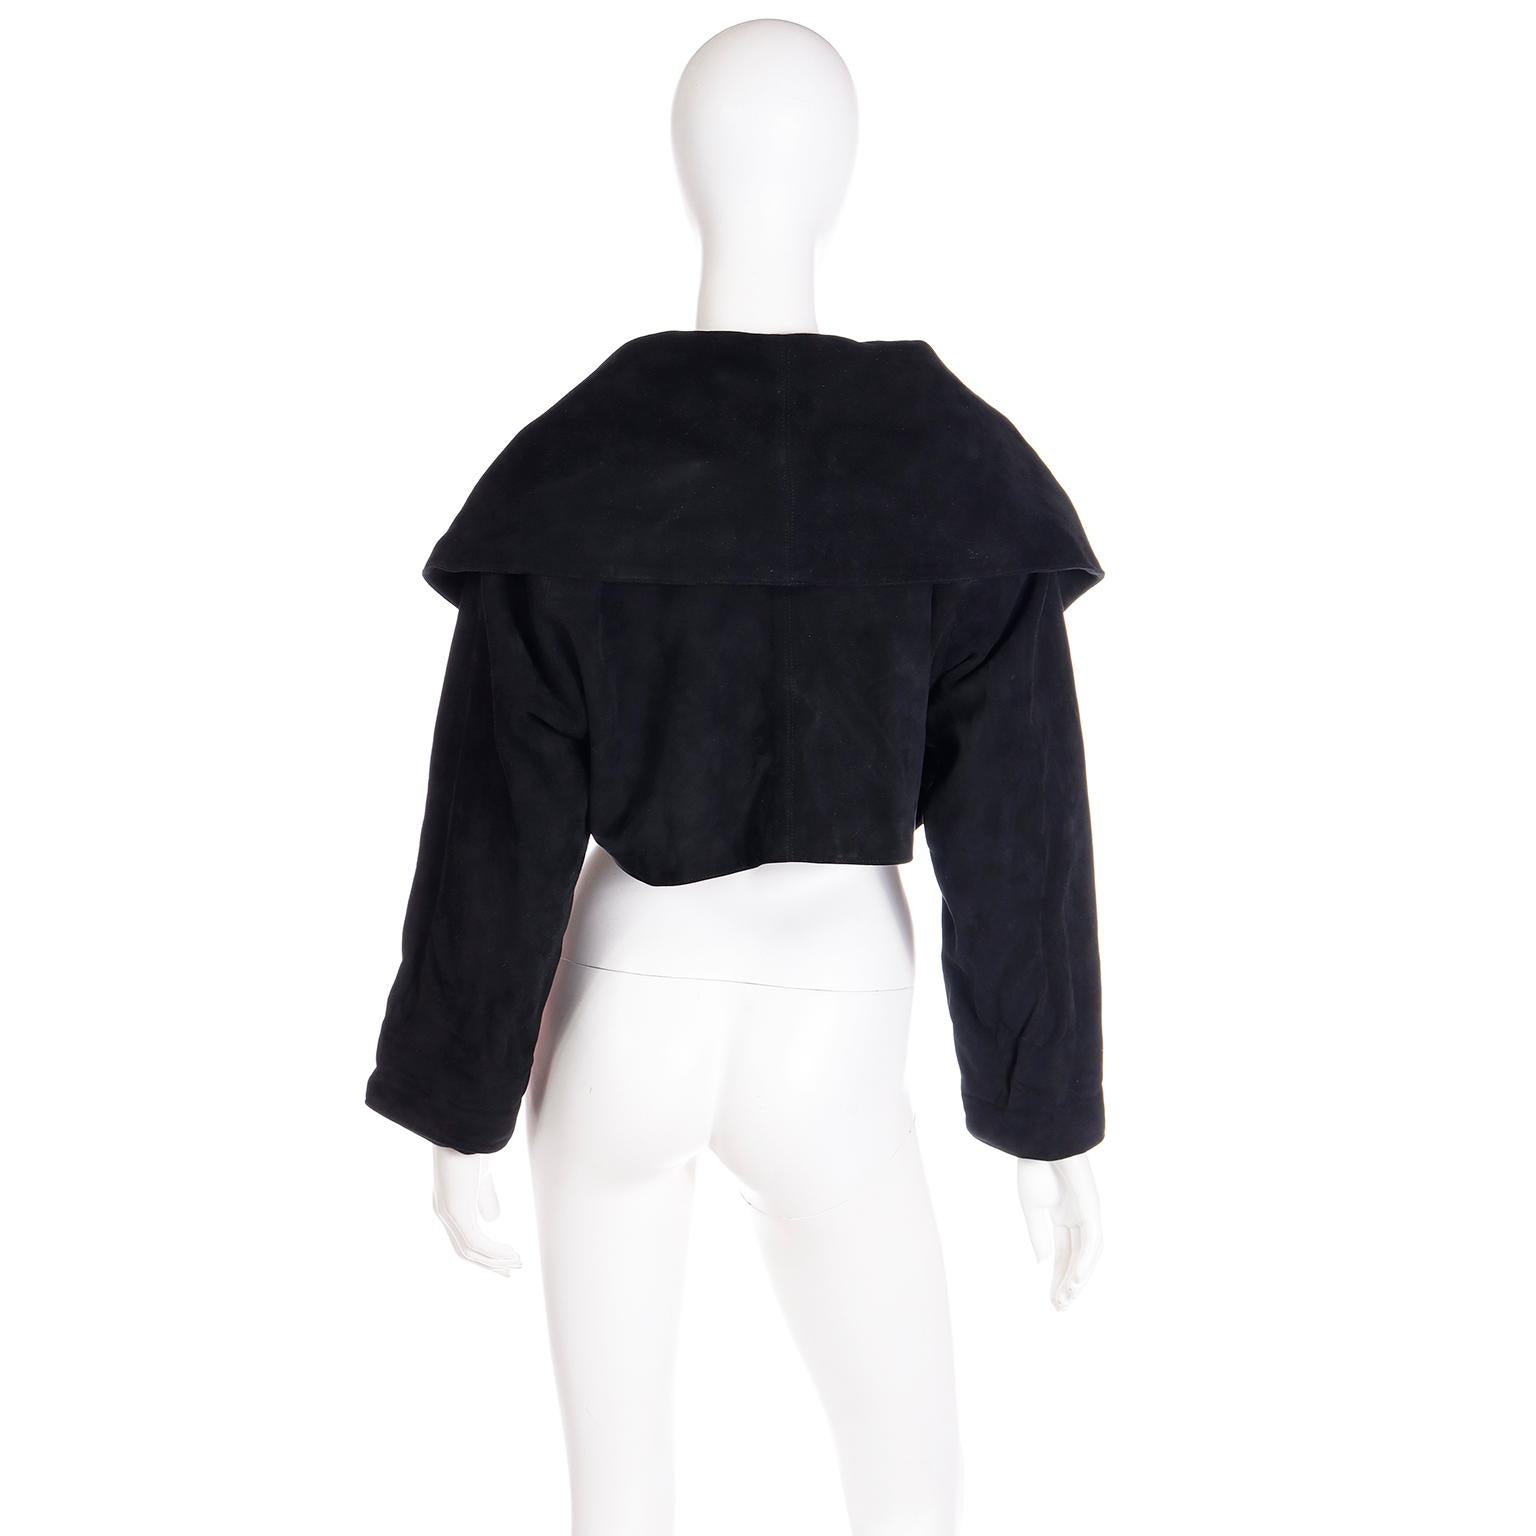 Azzedine Alaia Fall 1989 Vintage Black Lamb Suede Cropped Runway Jacket For Sale 2